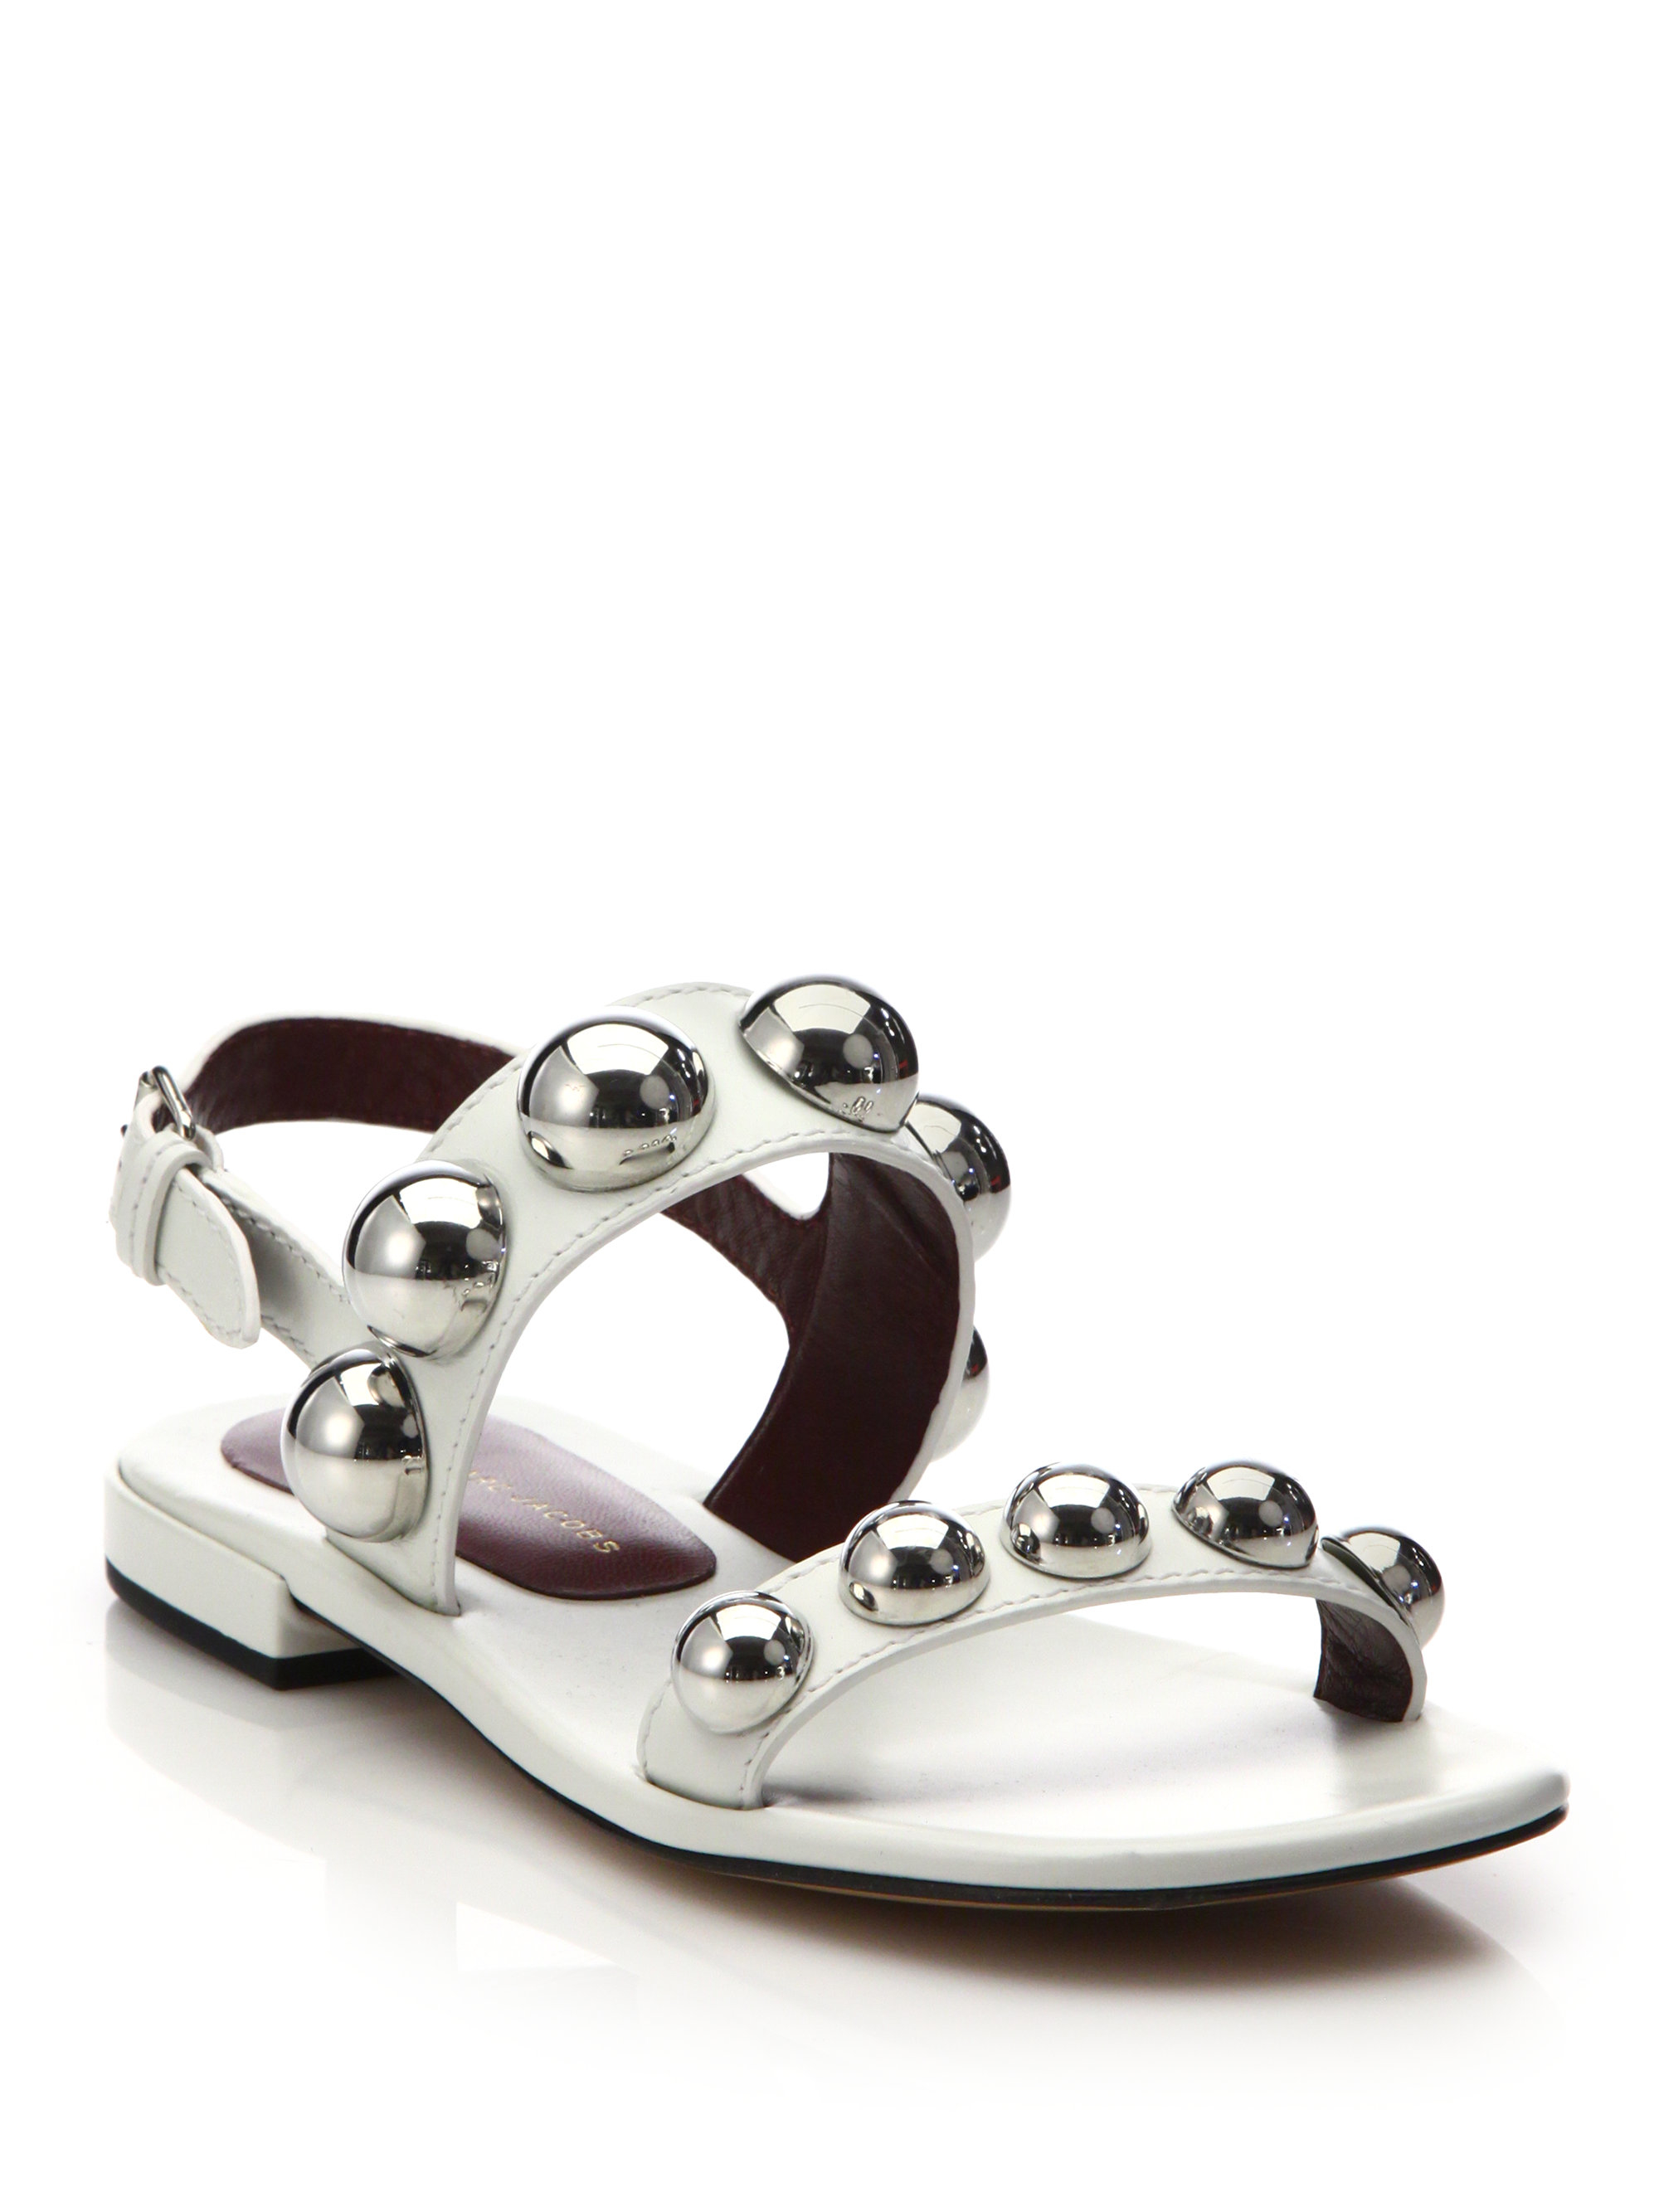 marc jacobs studded sandals